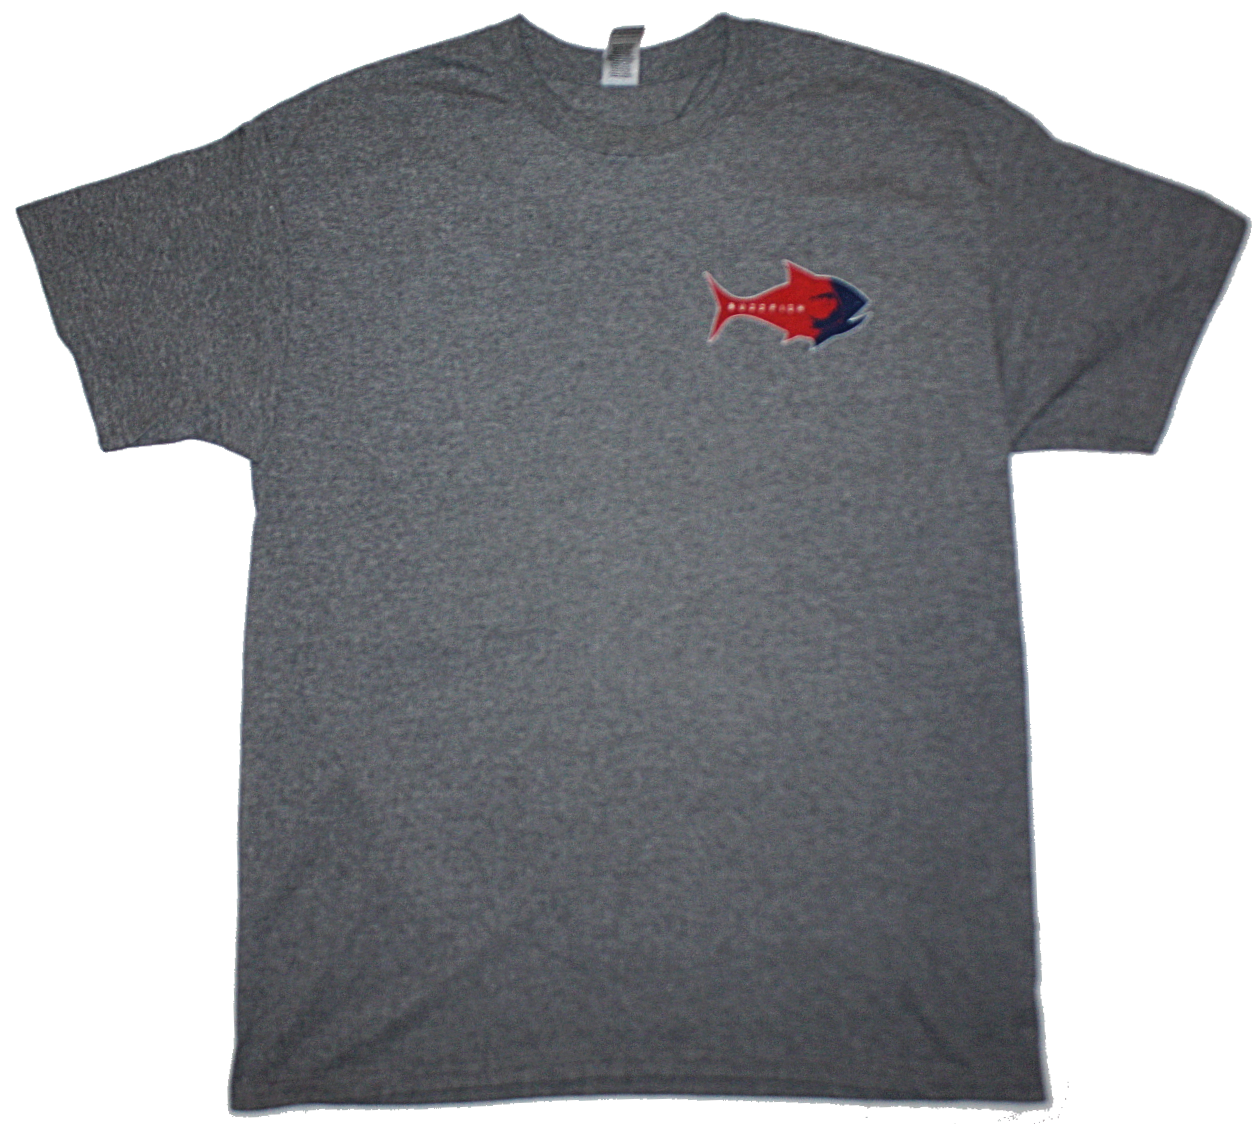 Red White and Blue blend T shirt